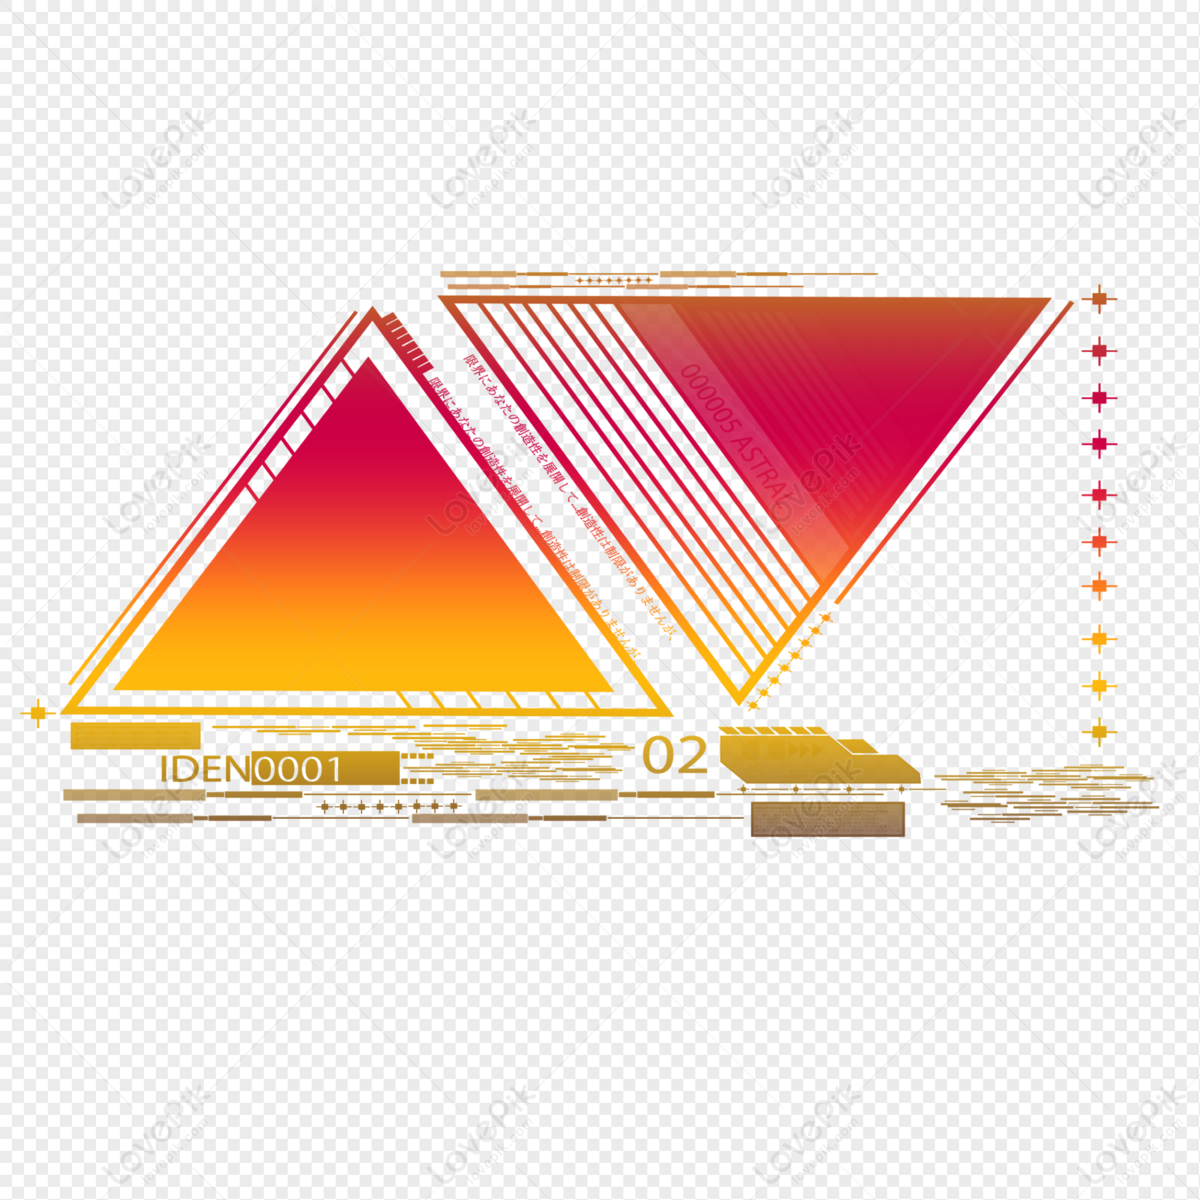 Cartoon Triangle Technology Illustration Free PNG And Clipart Image For  Free Download - Lovepik | 401264249